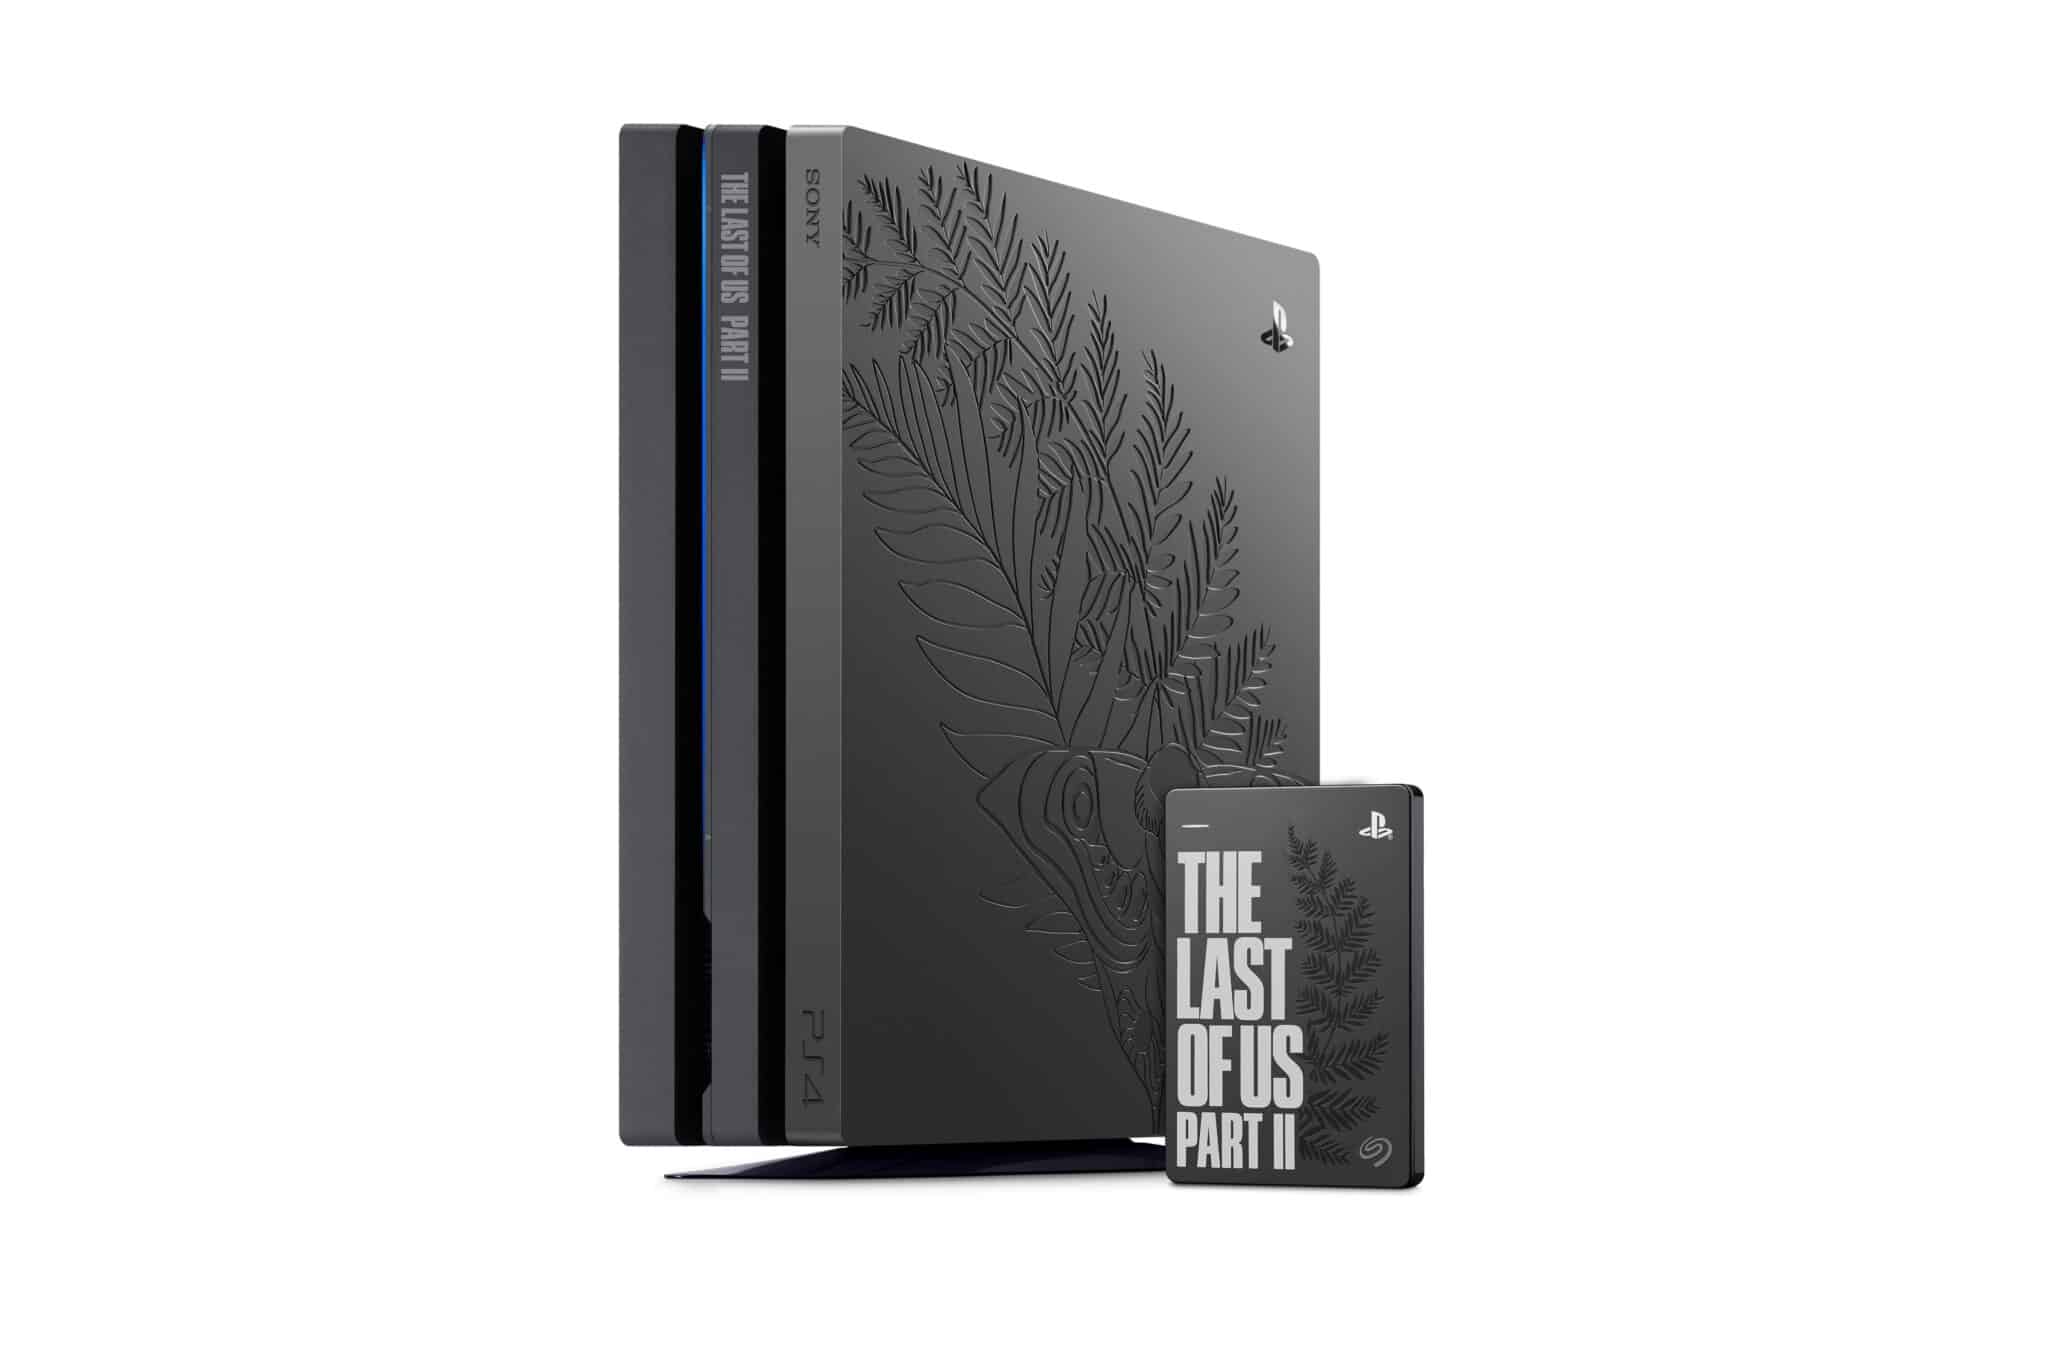 Last limited. Sony PLAYSTATION 4 Pro Limited Edition. Ps2 Limited Edition. Ps4 Pro TLOU 2.